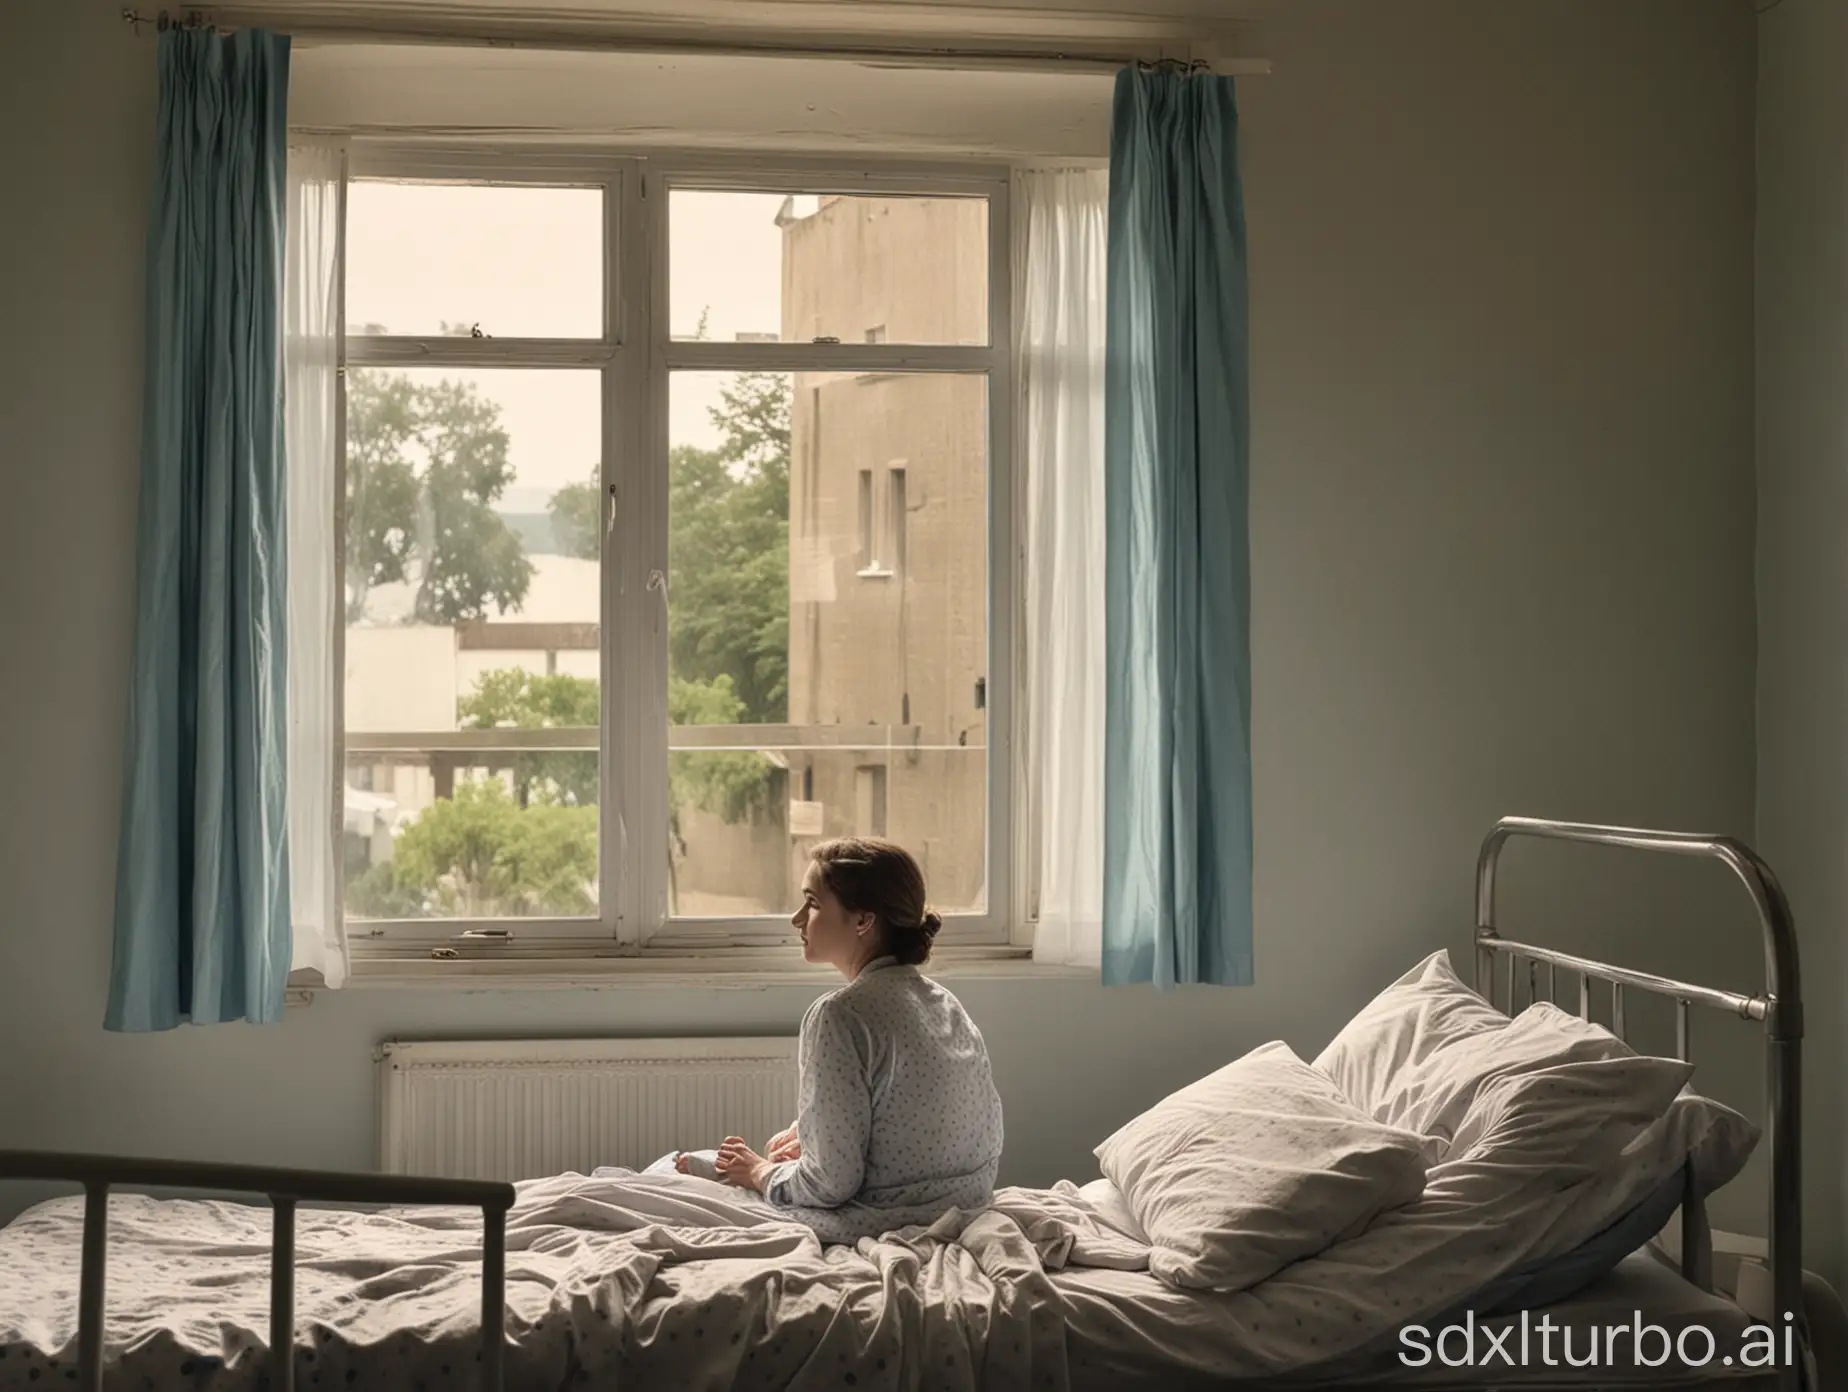 Woman-Sitting-on-Hospital-Bed-Looking-Through-Window